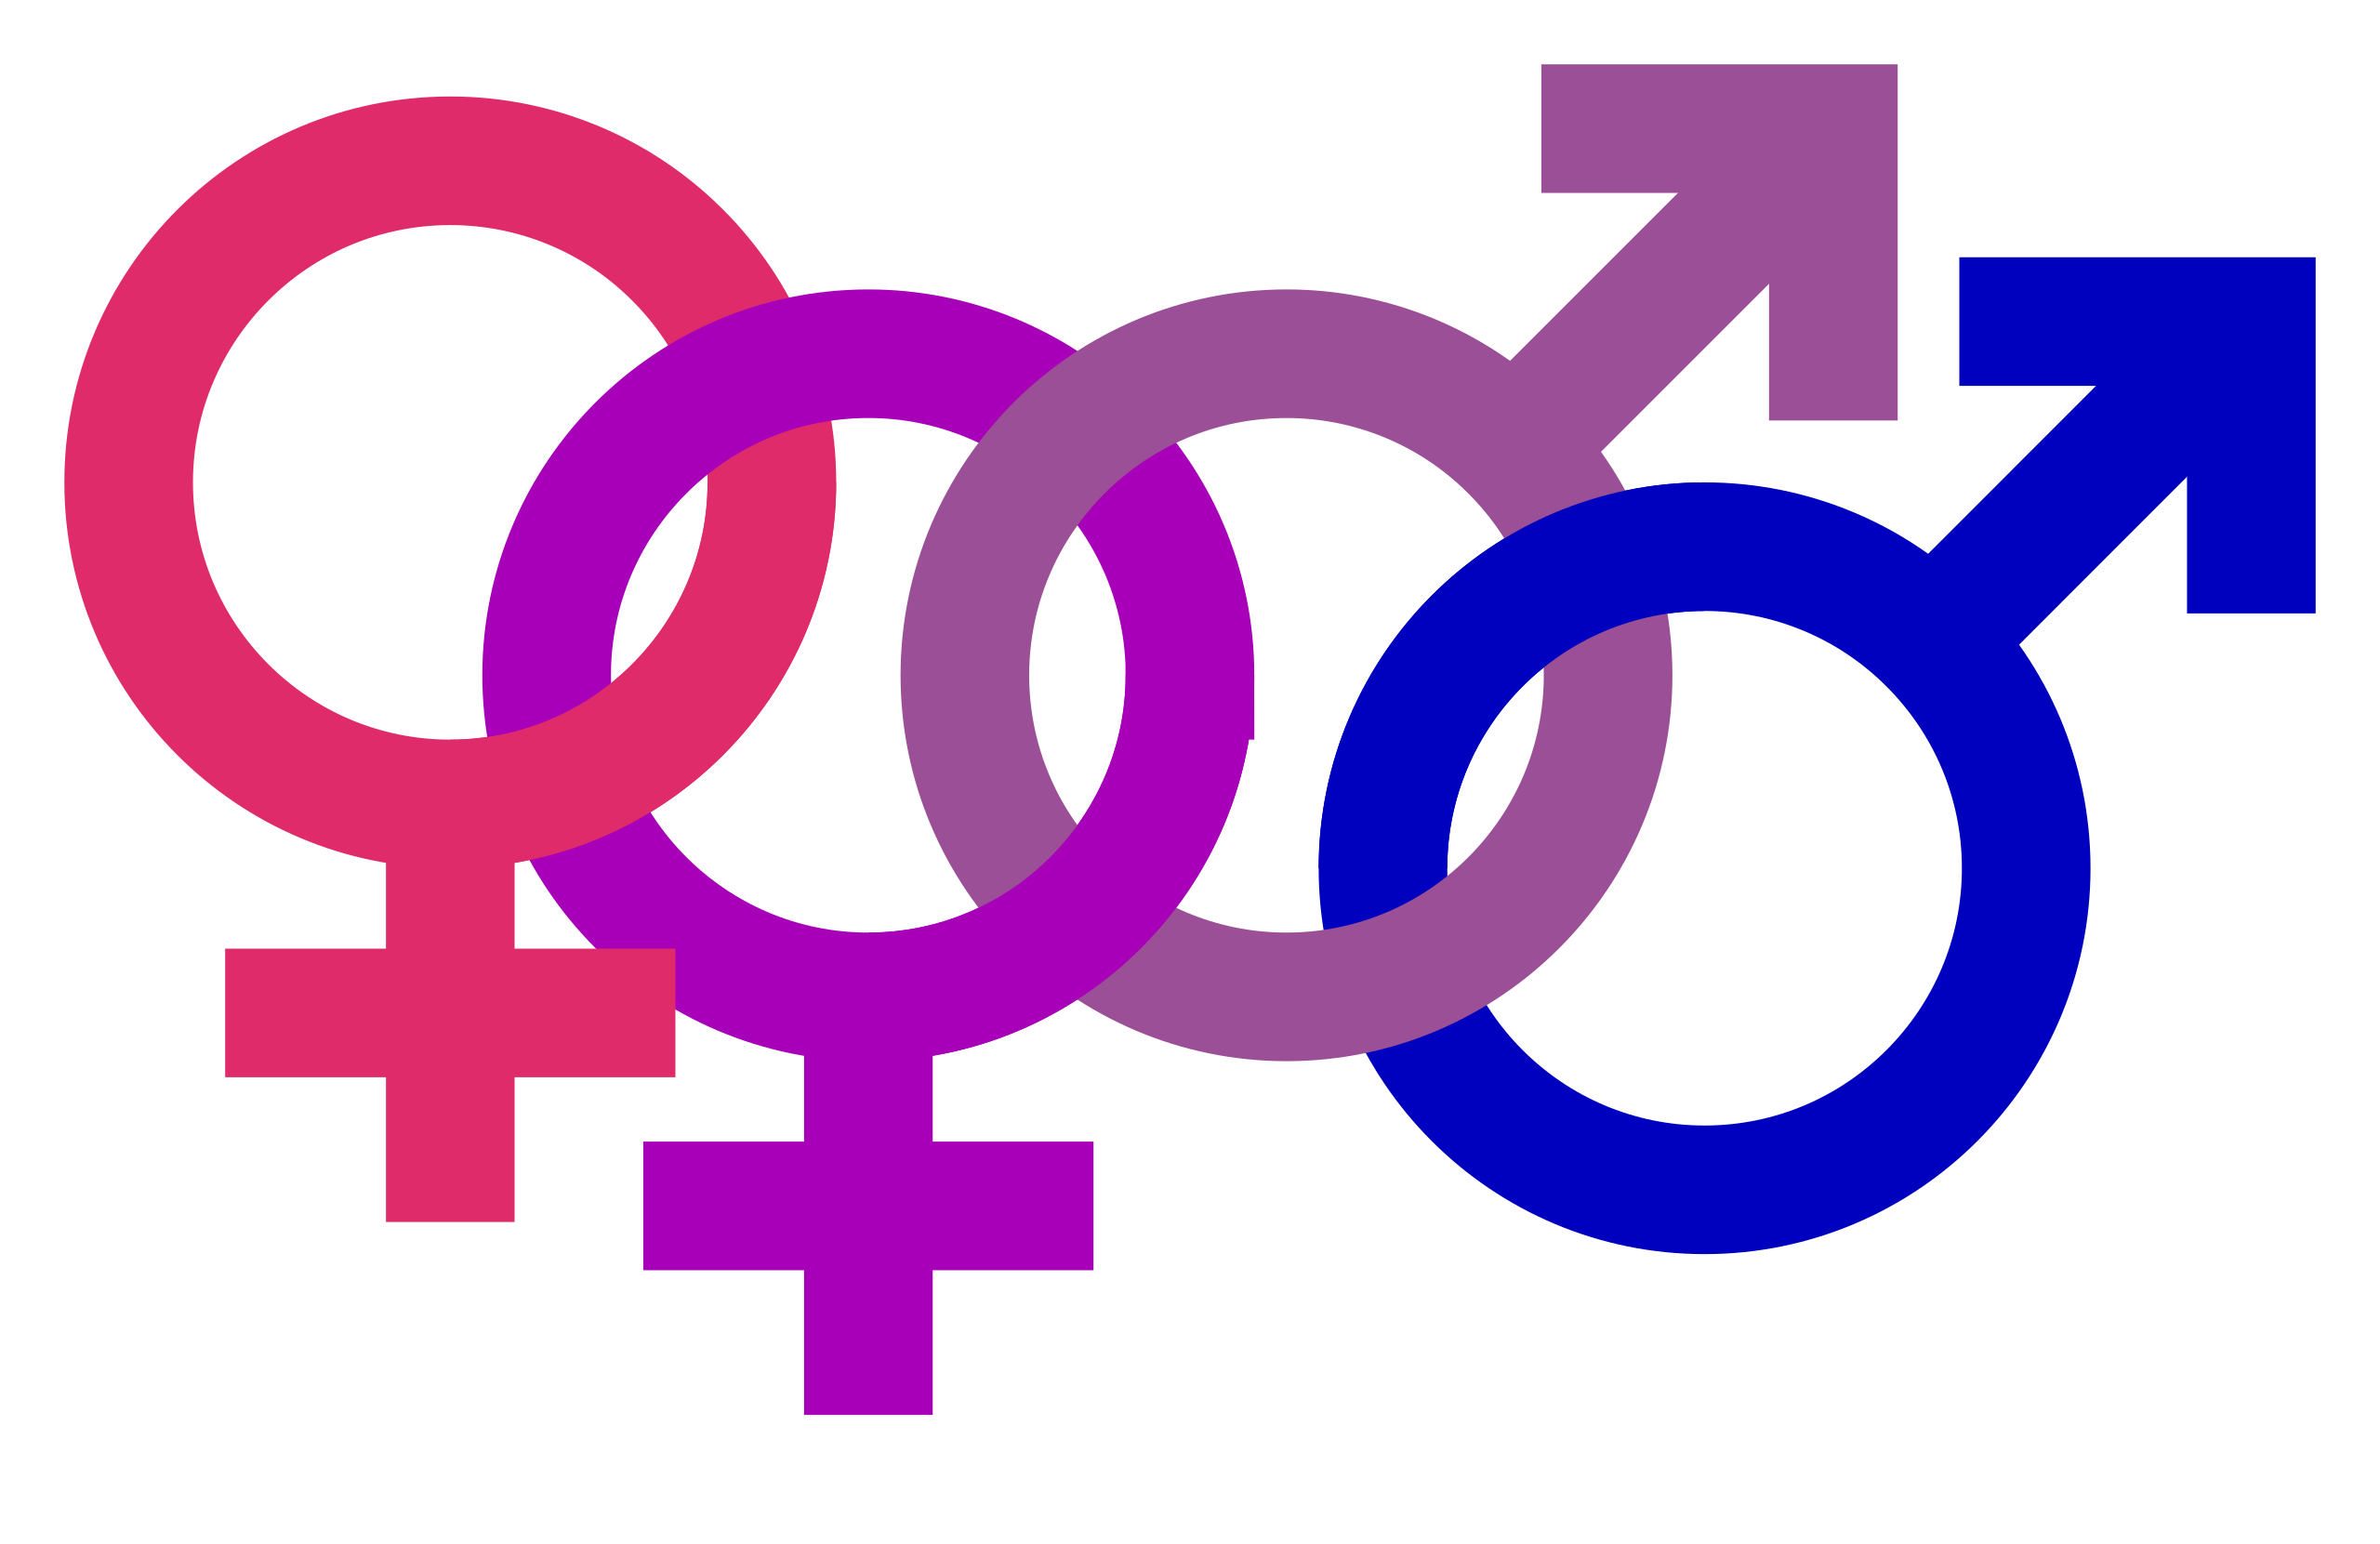 File:Bisexuality symbol (bold, color).svg - Wikipedia